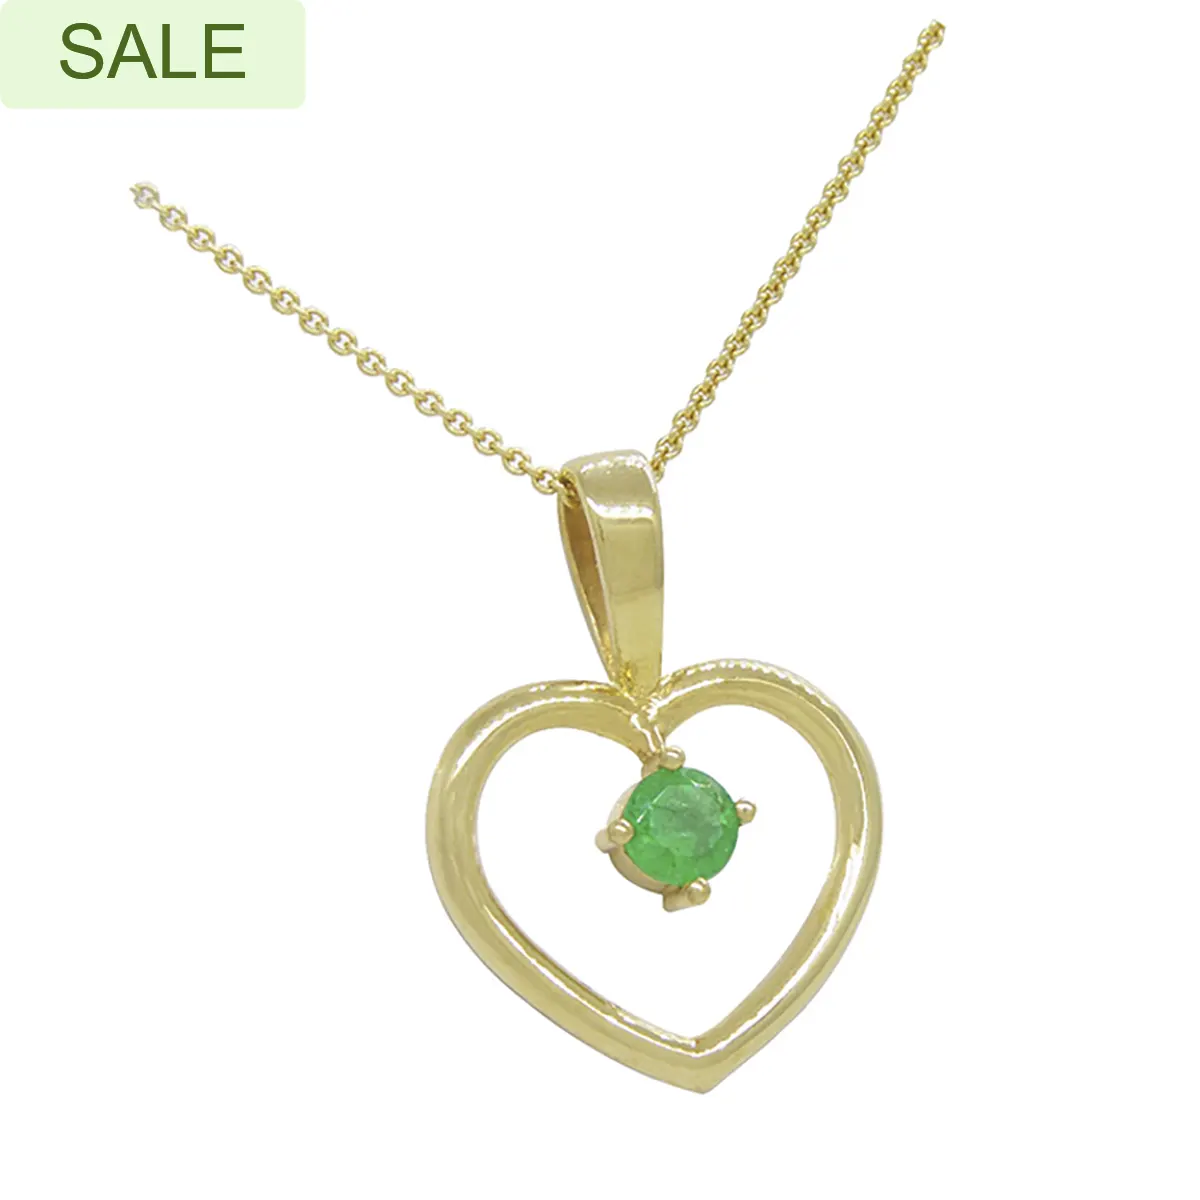 gold-plated-silver-heart-shape-pendant-with-genuine-round-cut-emerald